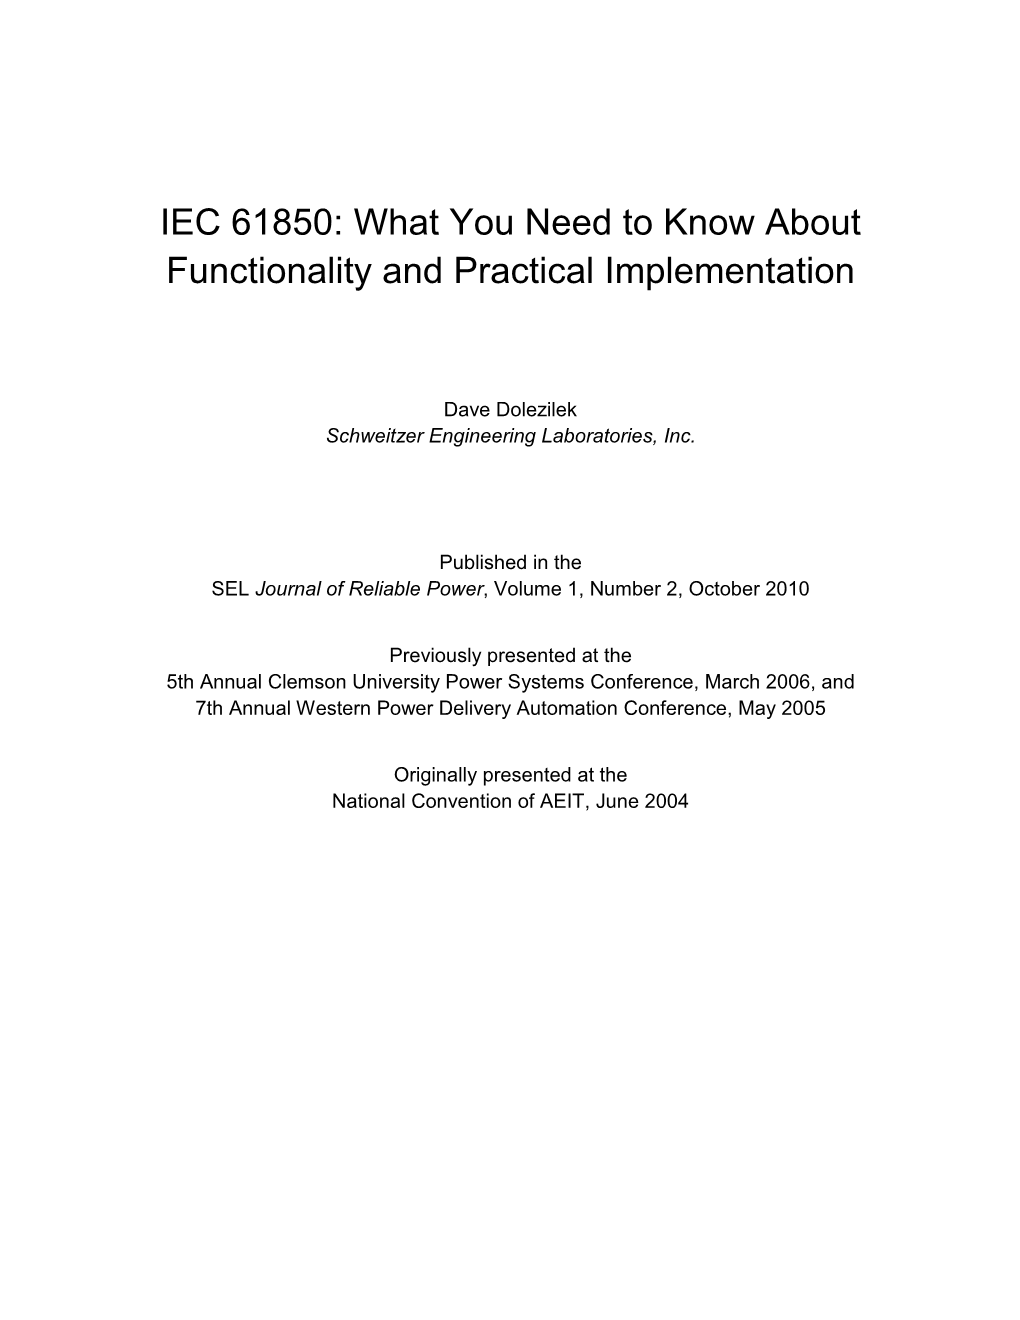 IEC 61850: What You Need to Know About Functionality and Practical Implementation